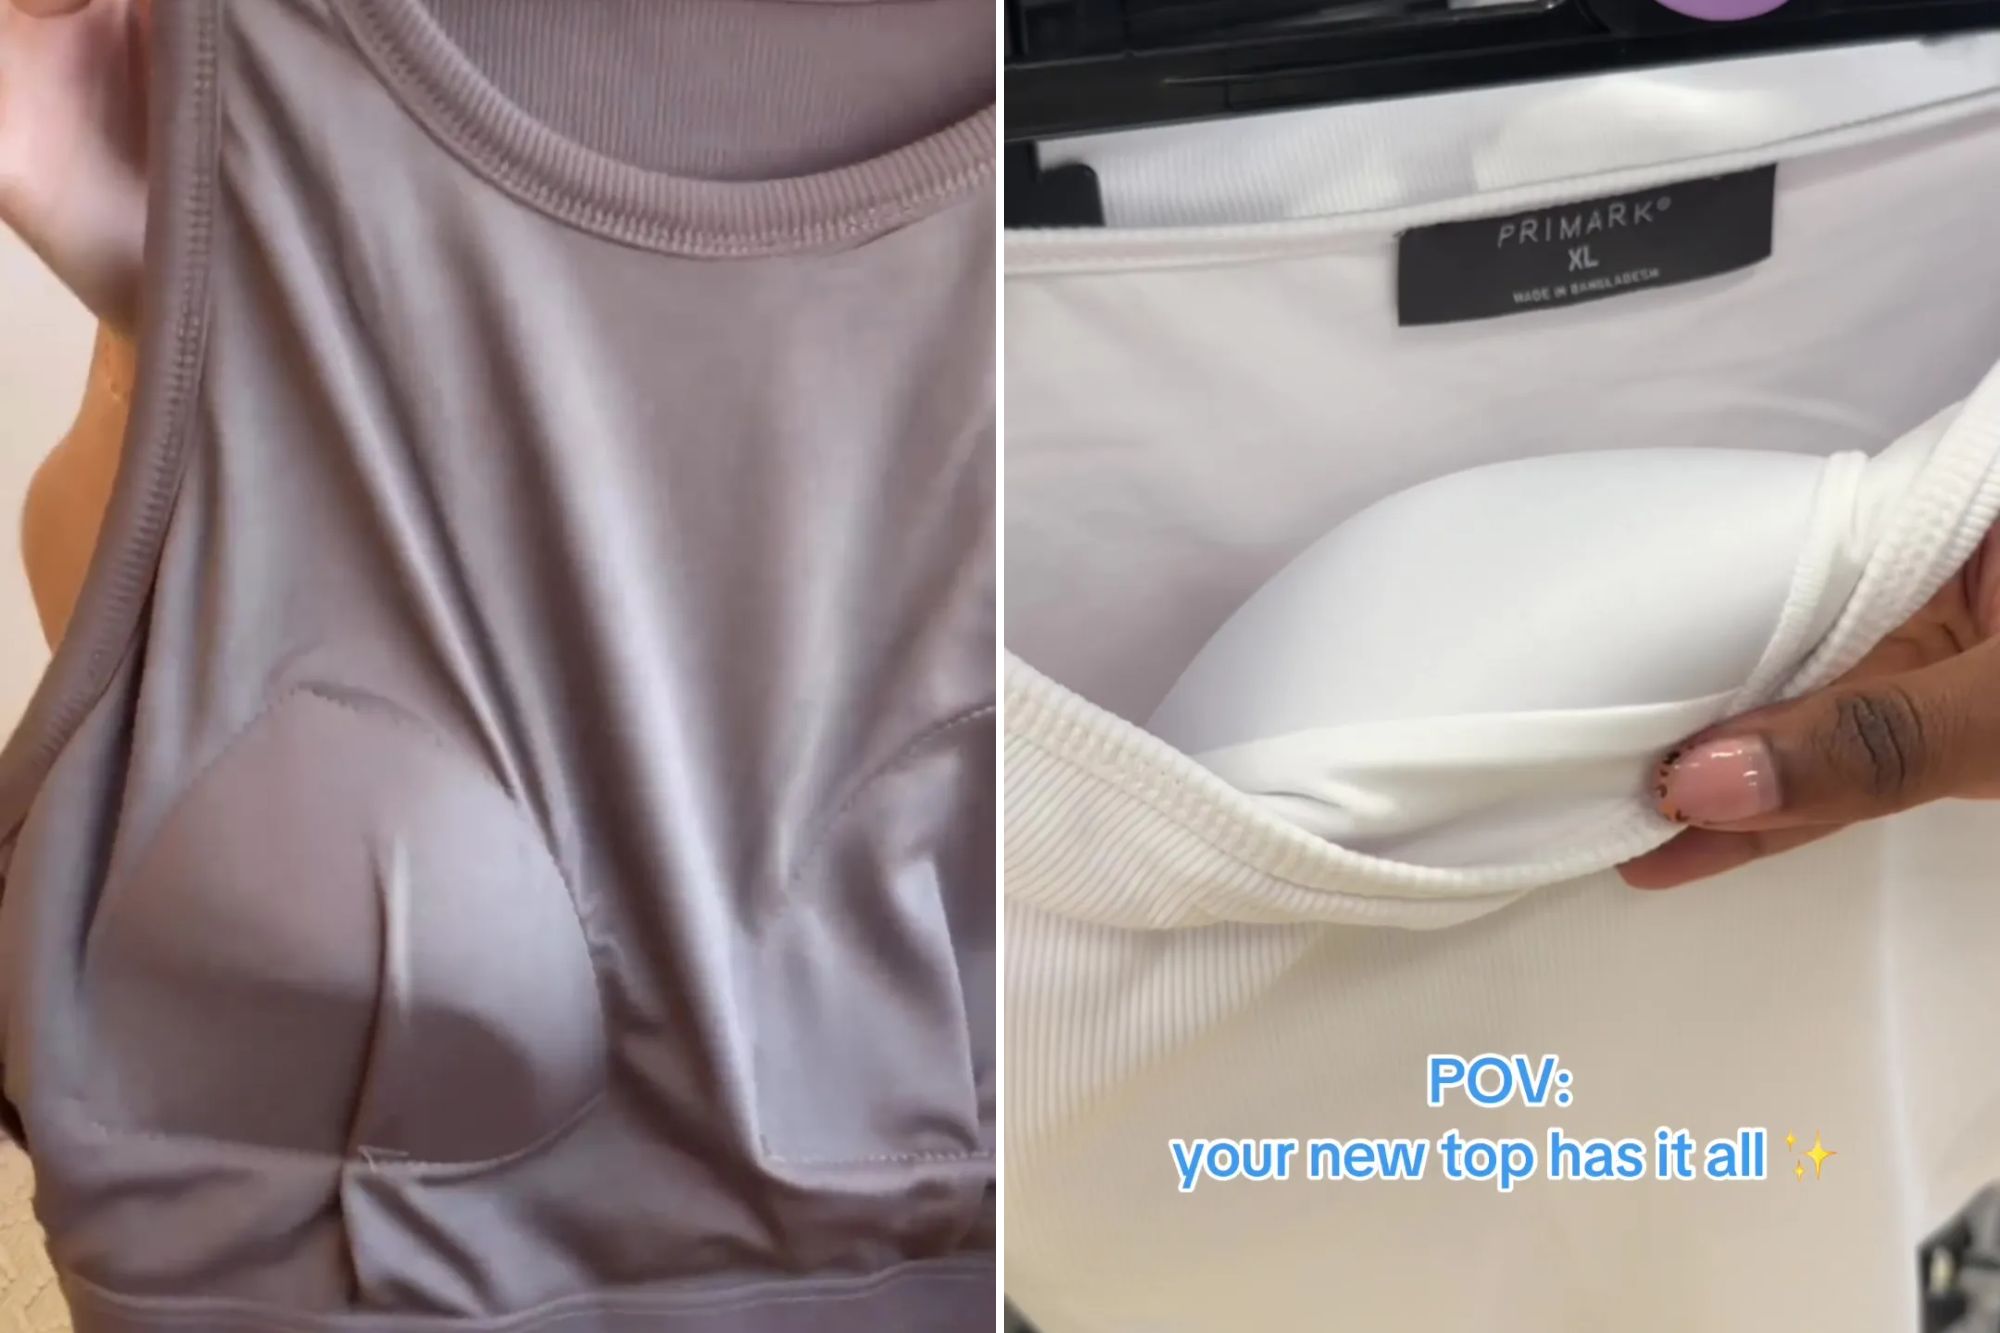 The crop tops have padded cups sewn inside